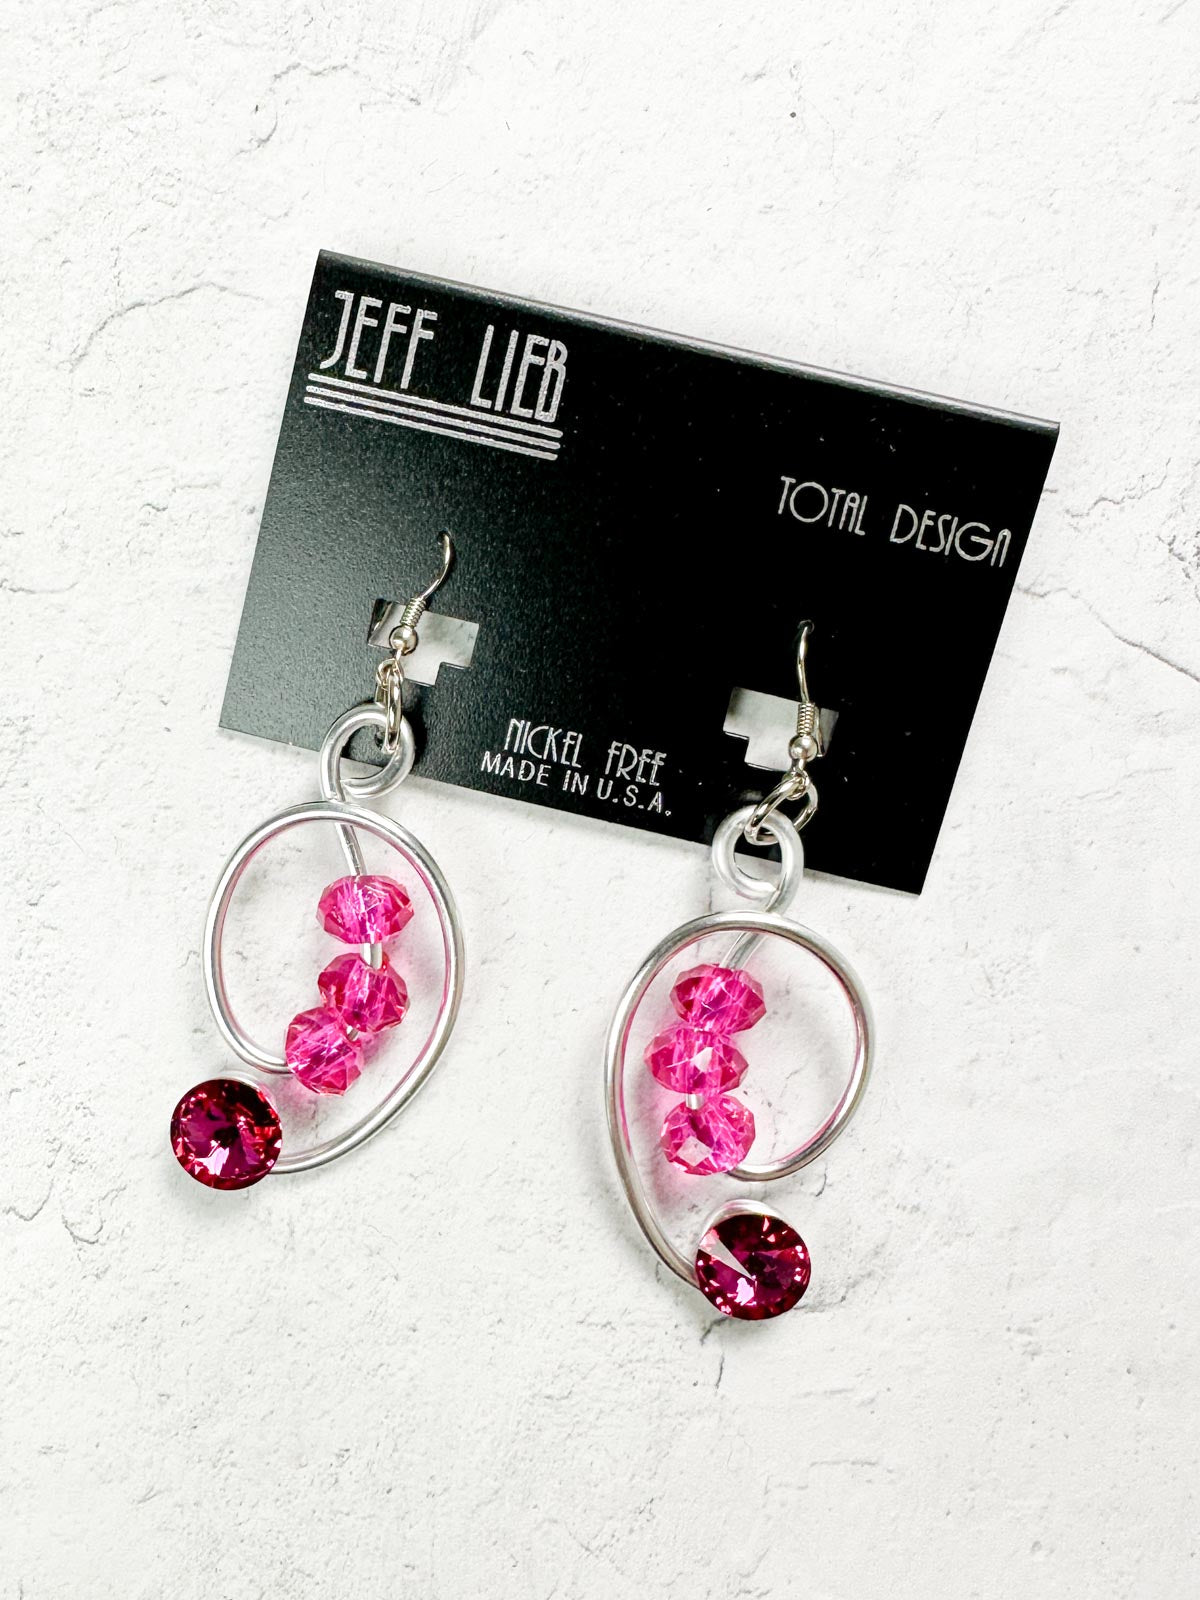 Jeff Lieb Total Design Jewelry Wire & Bead Drop Earrings, Silver/Pink - Statement Boutique